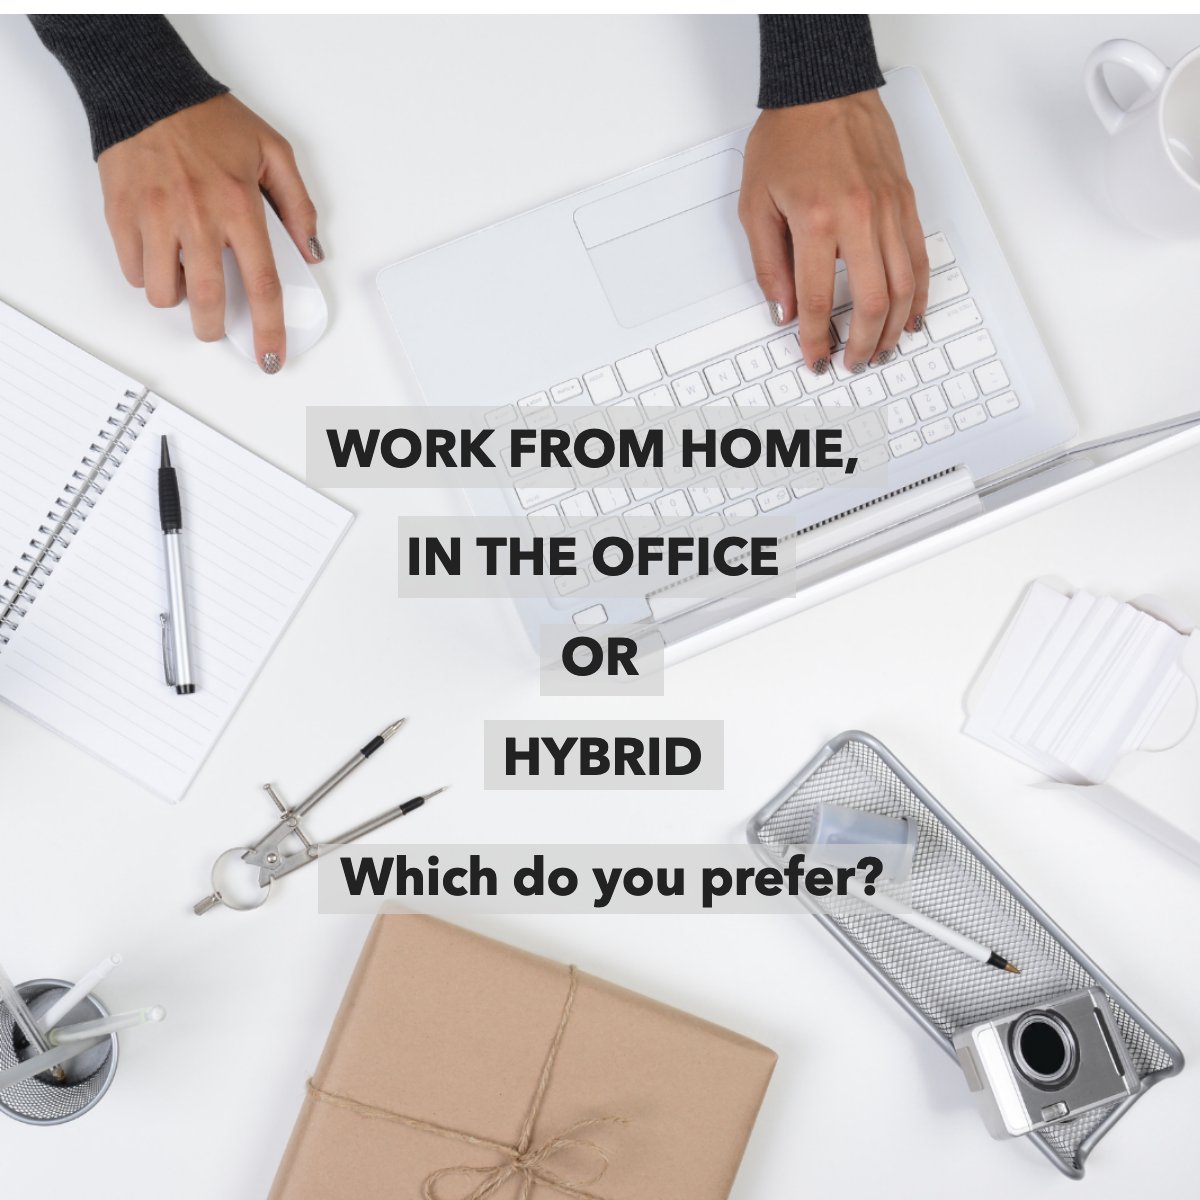 Do you have a dedicated working space? 💻
 
Tell us in the comments! 💭 

#question #workspace #worklife #homeoffice #hybridwork
 #DebbieRettbergSells #TheKeyTeamNorthrop